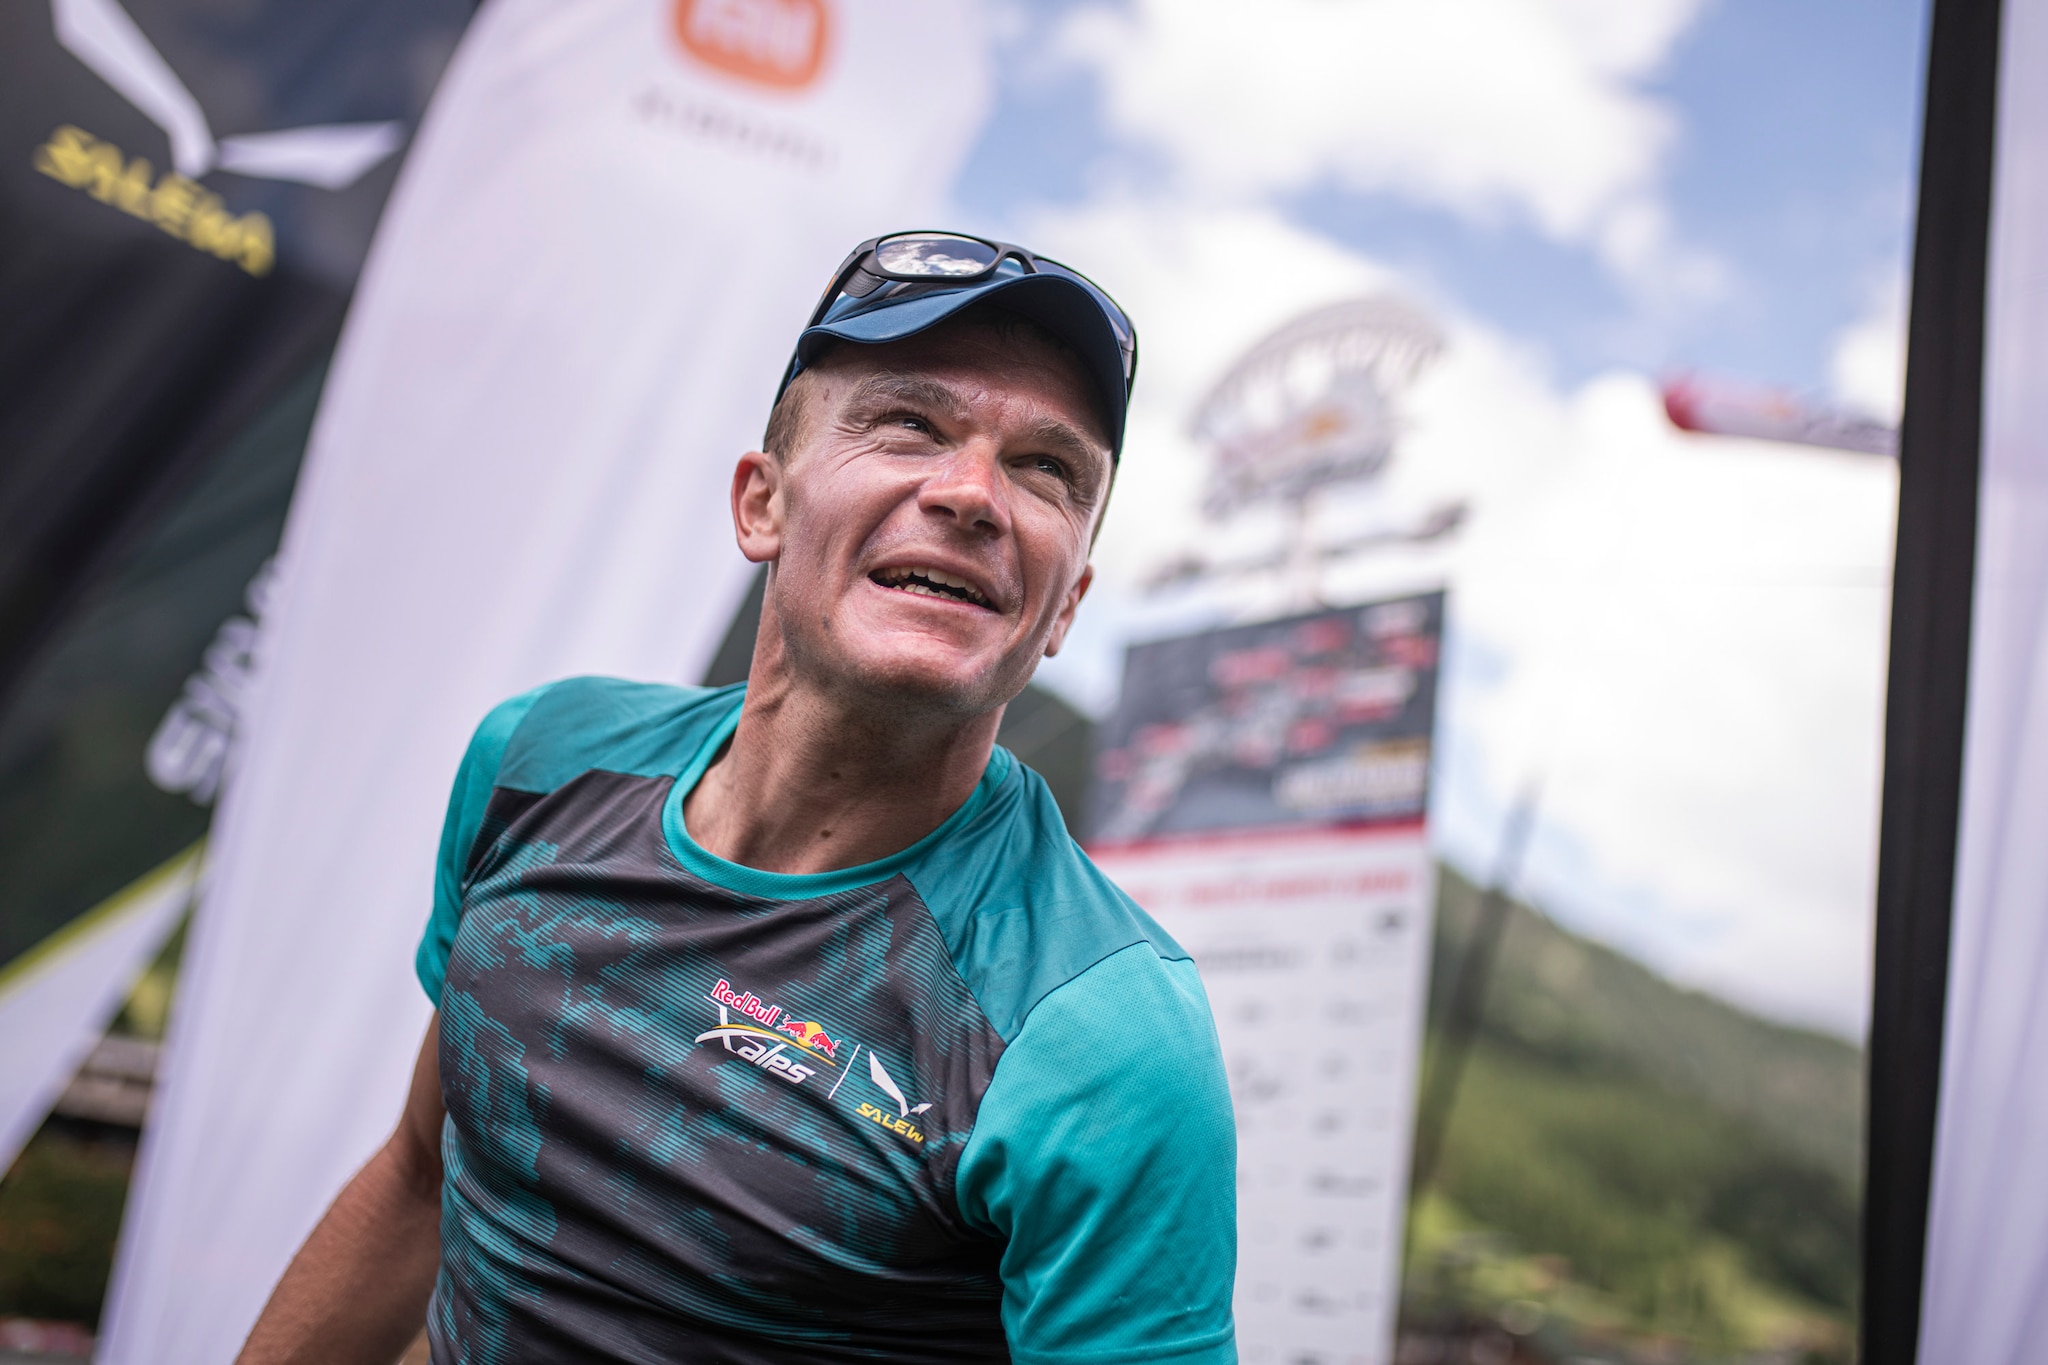 Benoit Outters (FRA2) seen in Lermoos prior to the Red Bull X-Alps, Austria on June 22, 2021.